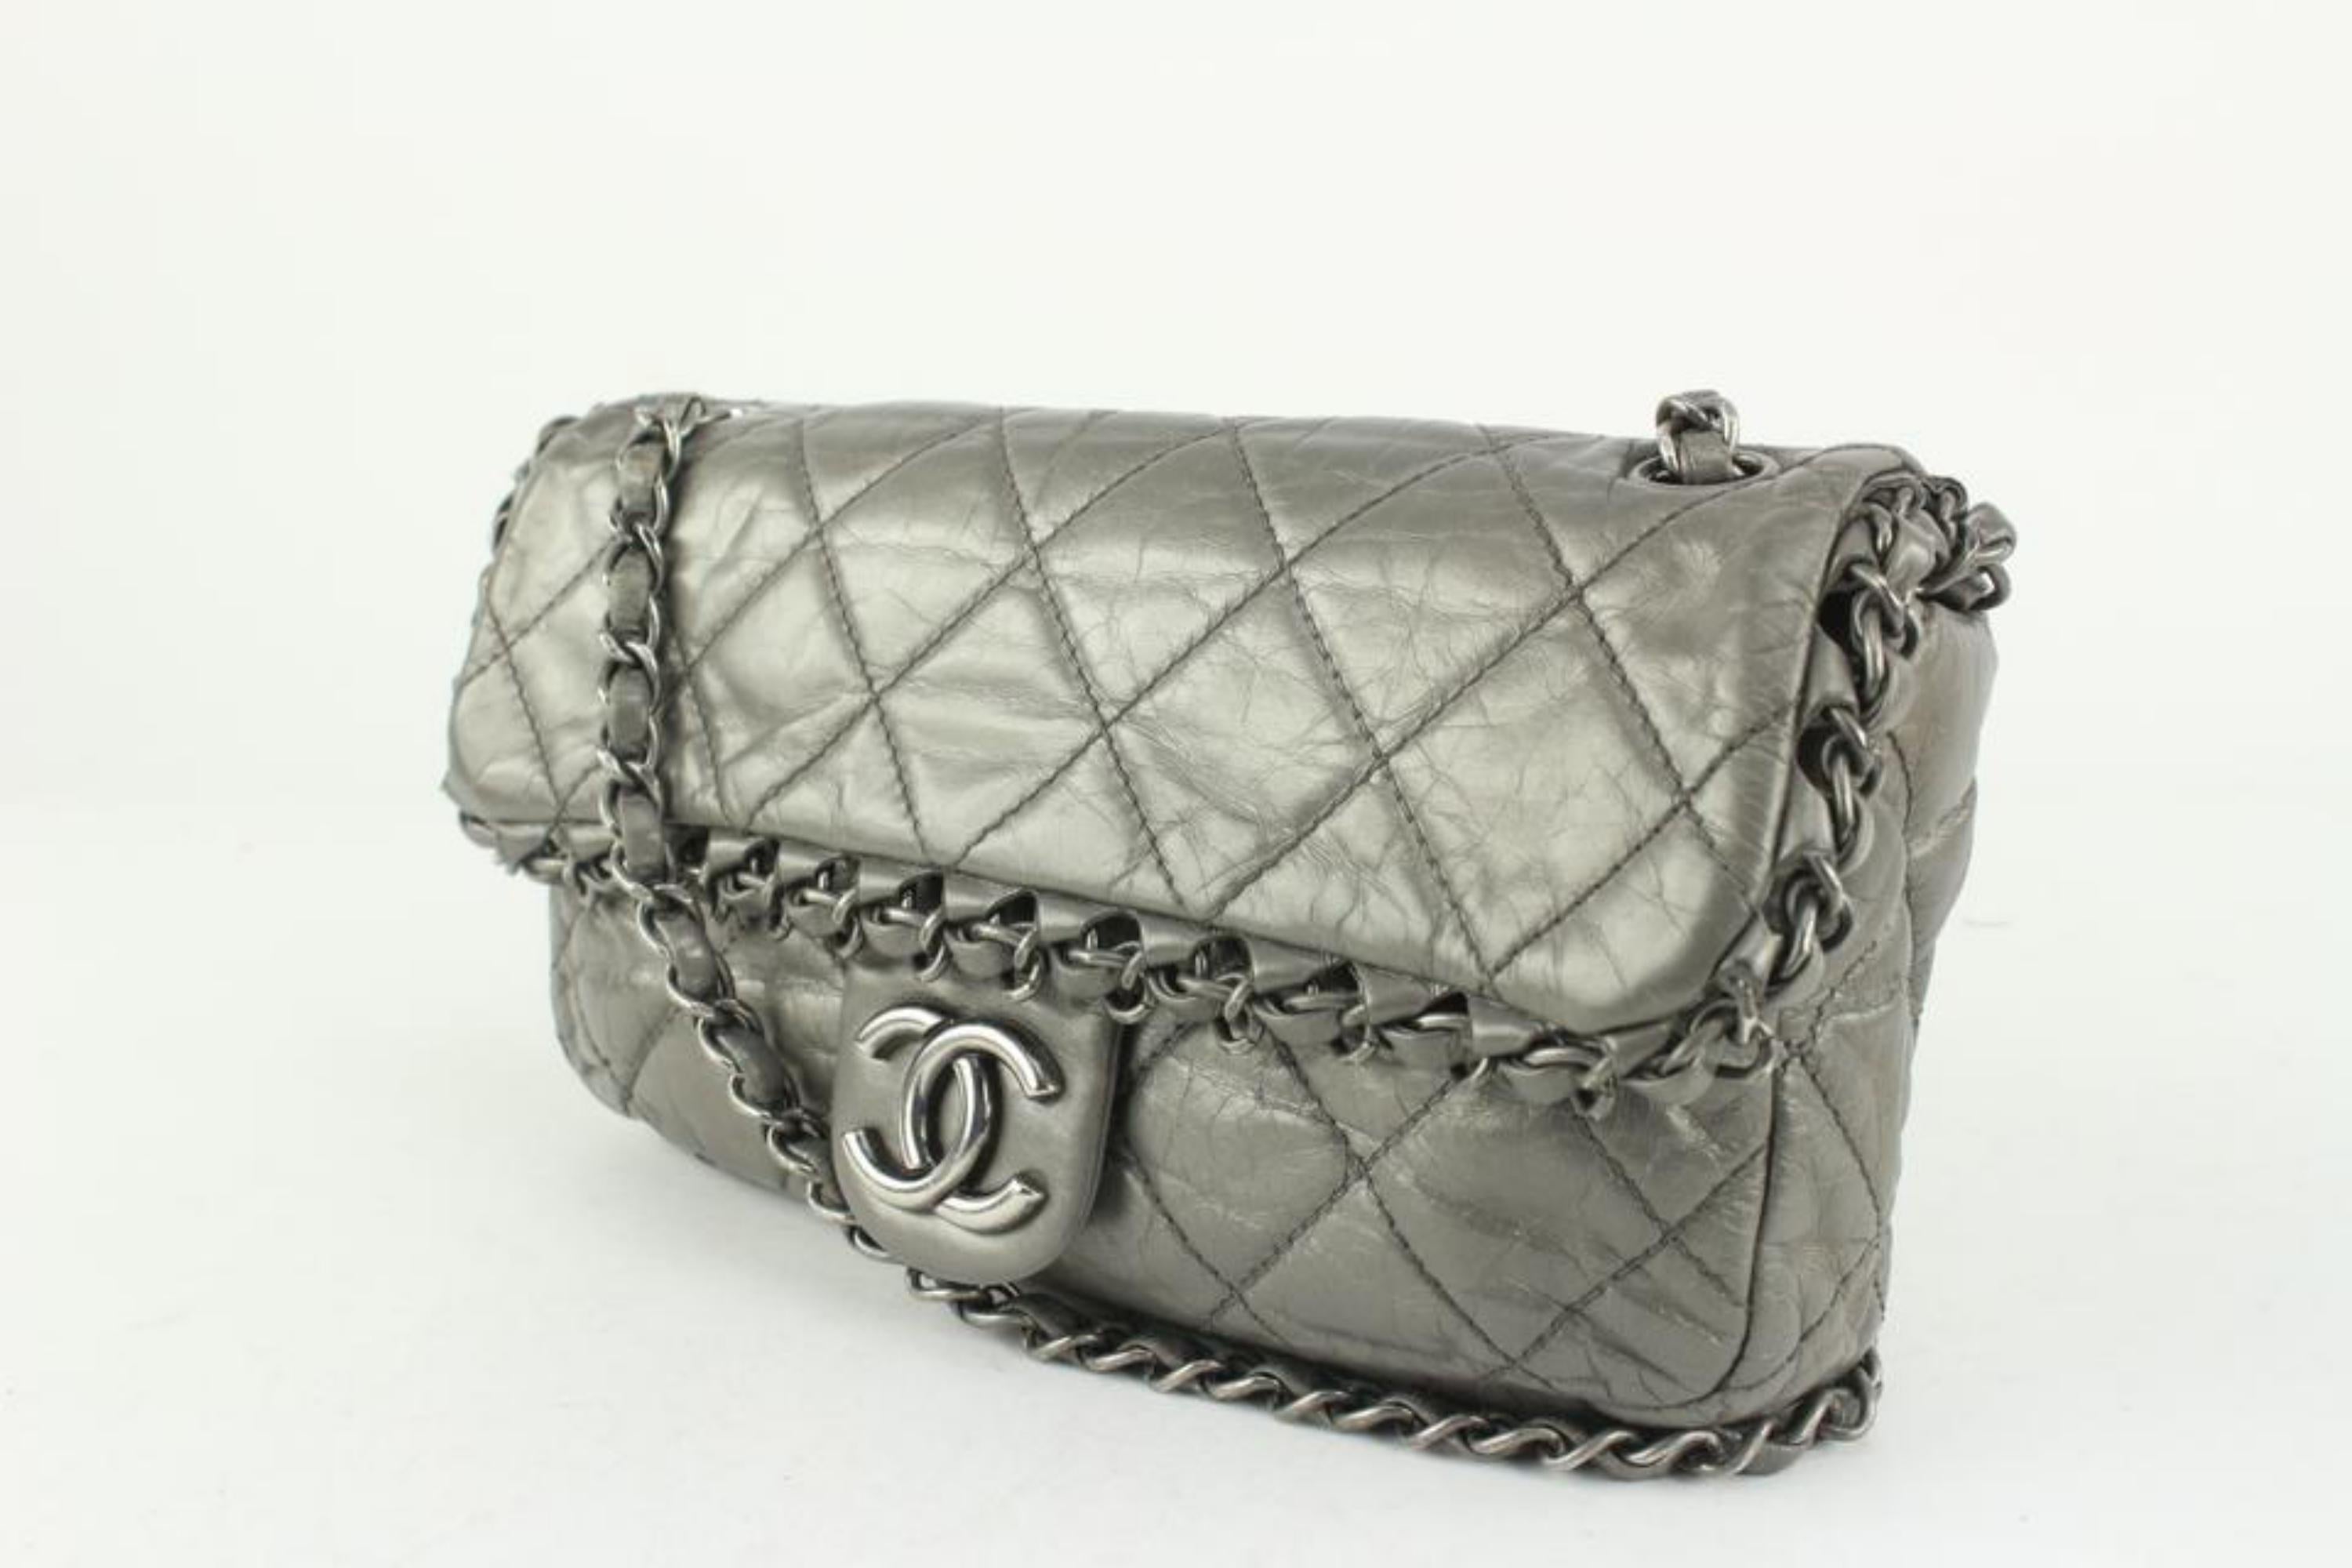 Chanel Grey Quilted Leather Chain Around Flap Bag 1122c4
Date Code/Serial Number: 16562637
Made In: Italy
Measurements: Length:  10